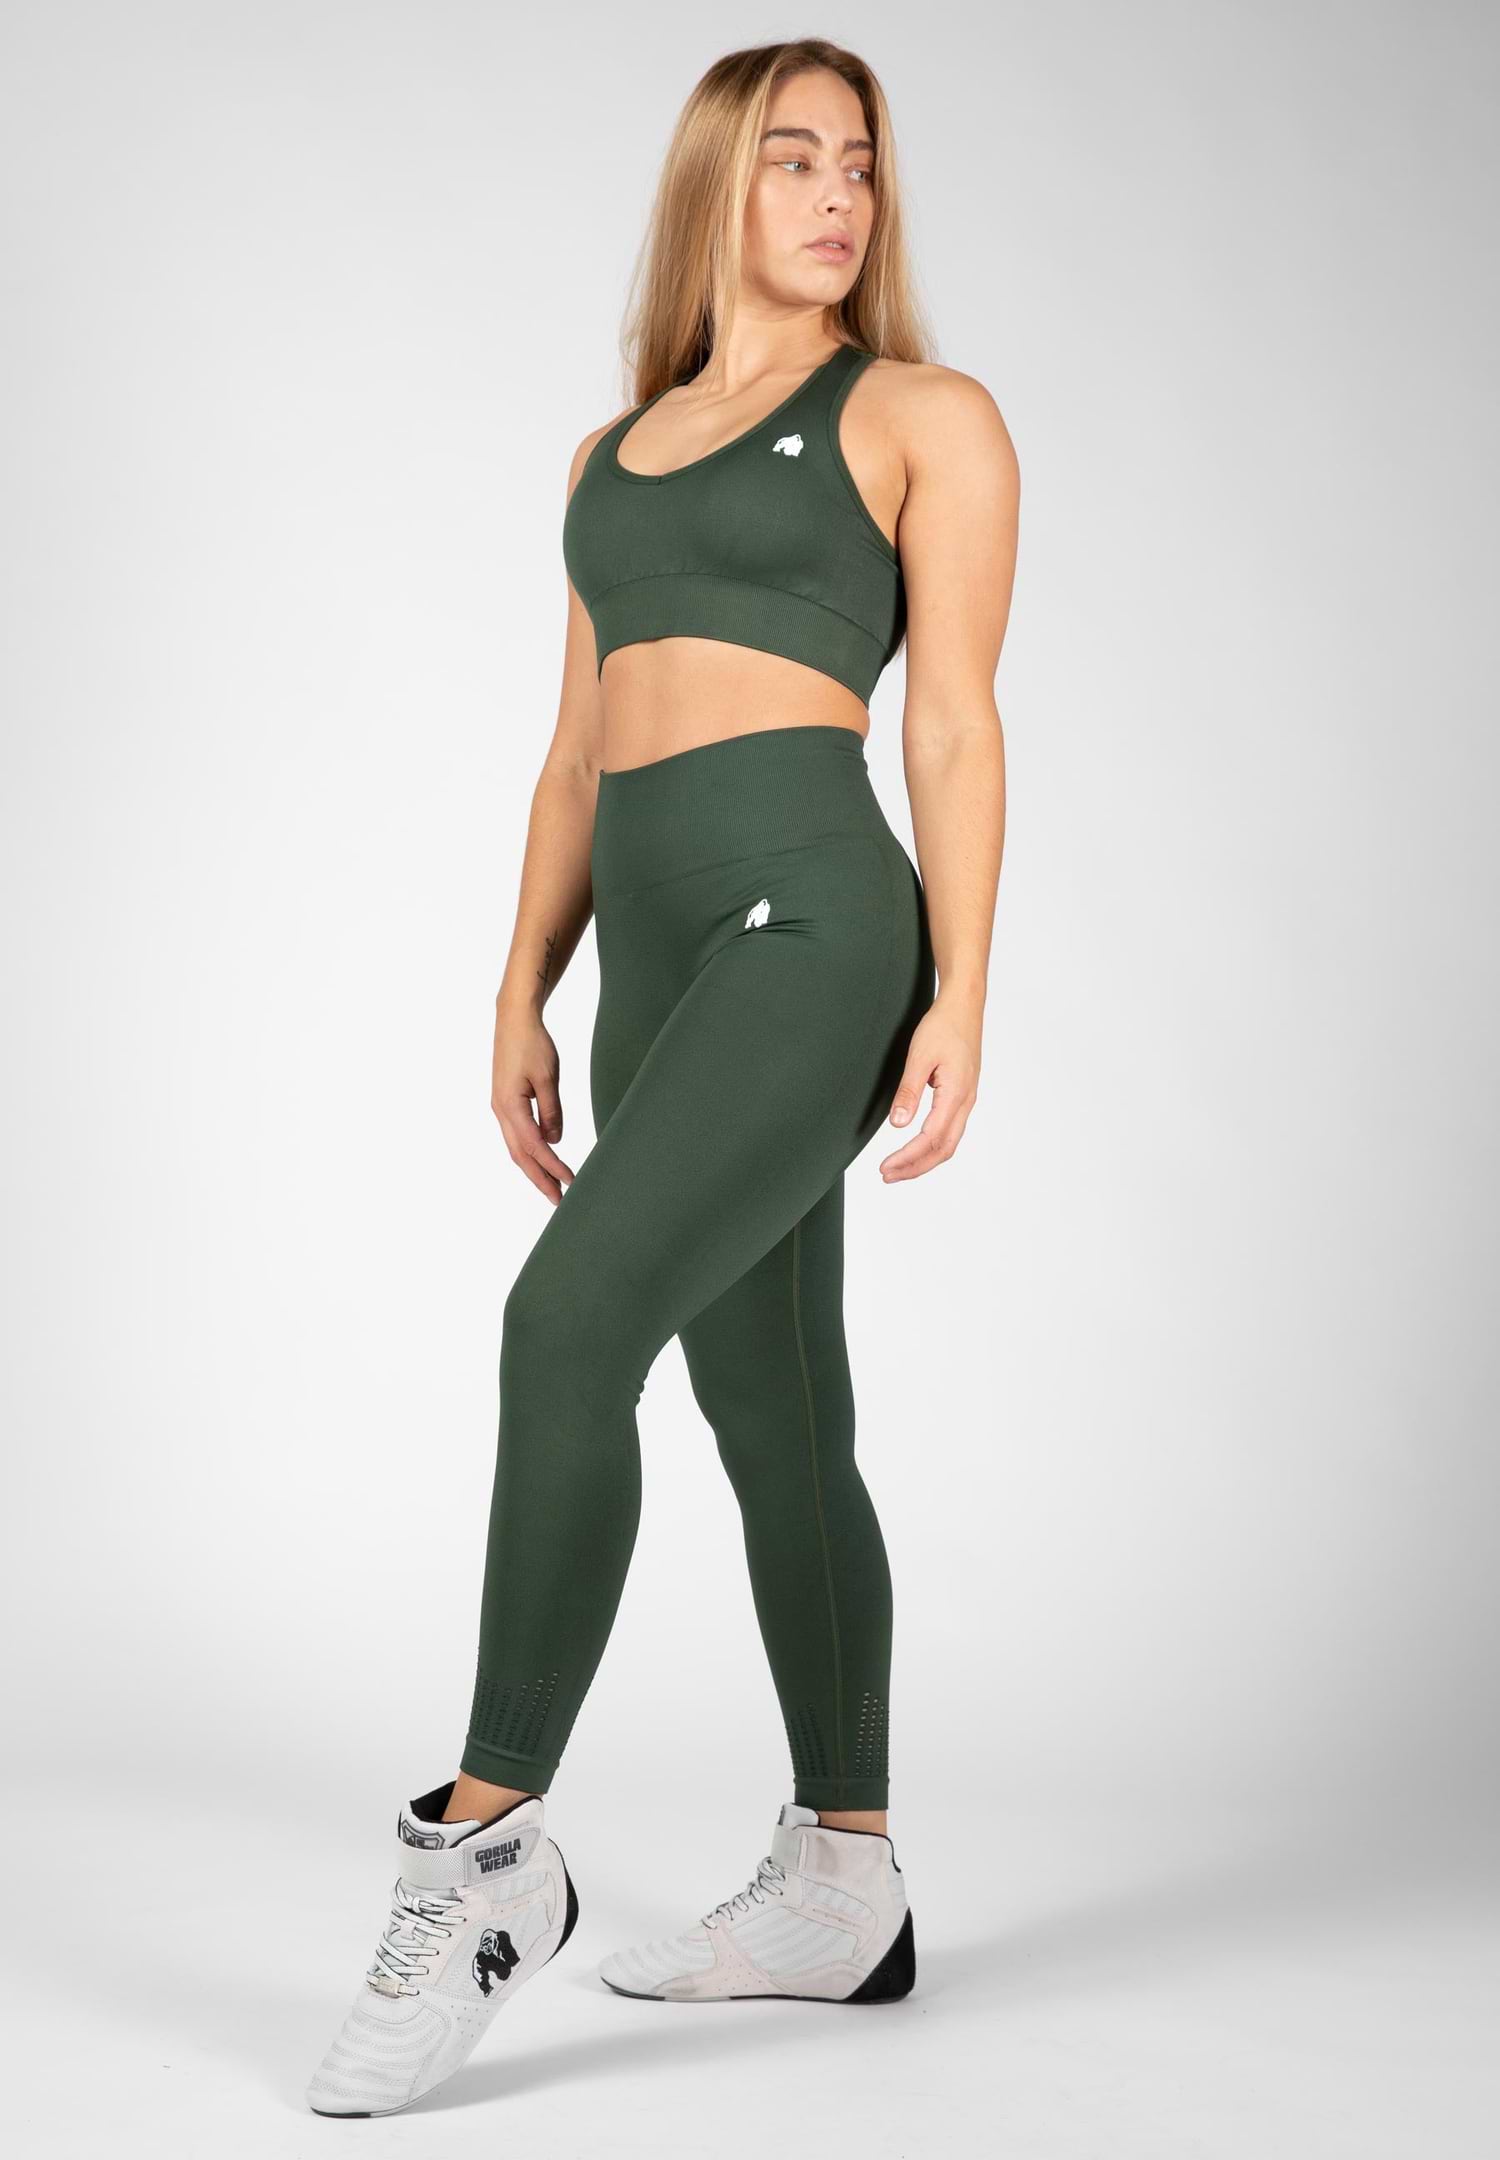 Workout Sets For Women 2 Piece Sport Bra Leggings Outfit Army Green Medium